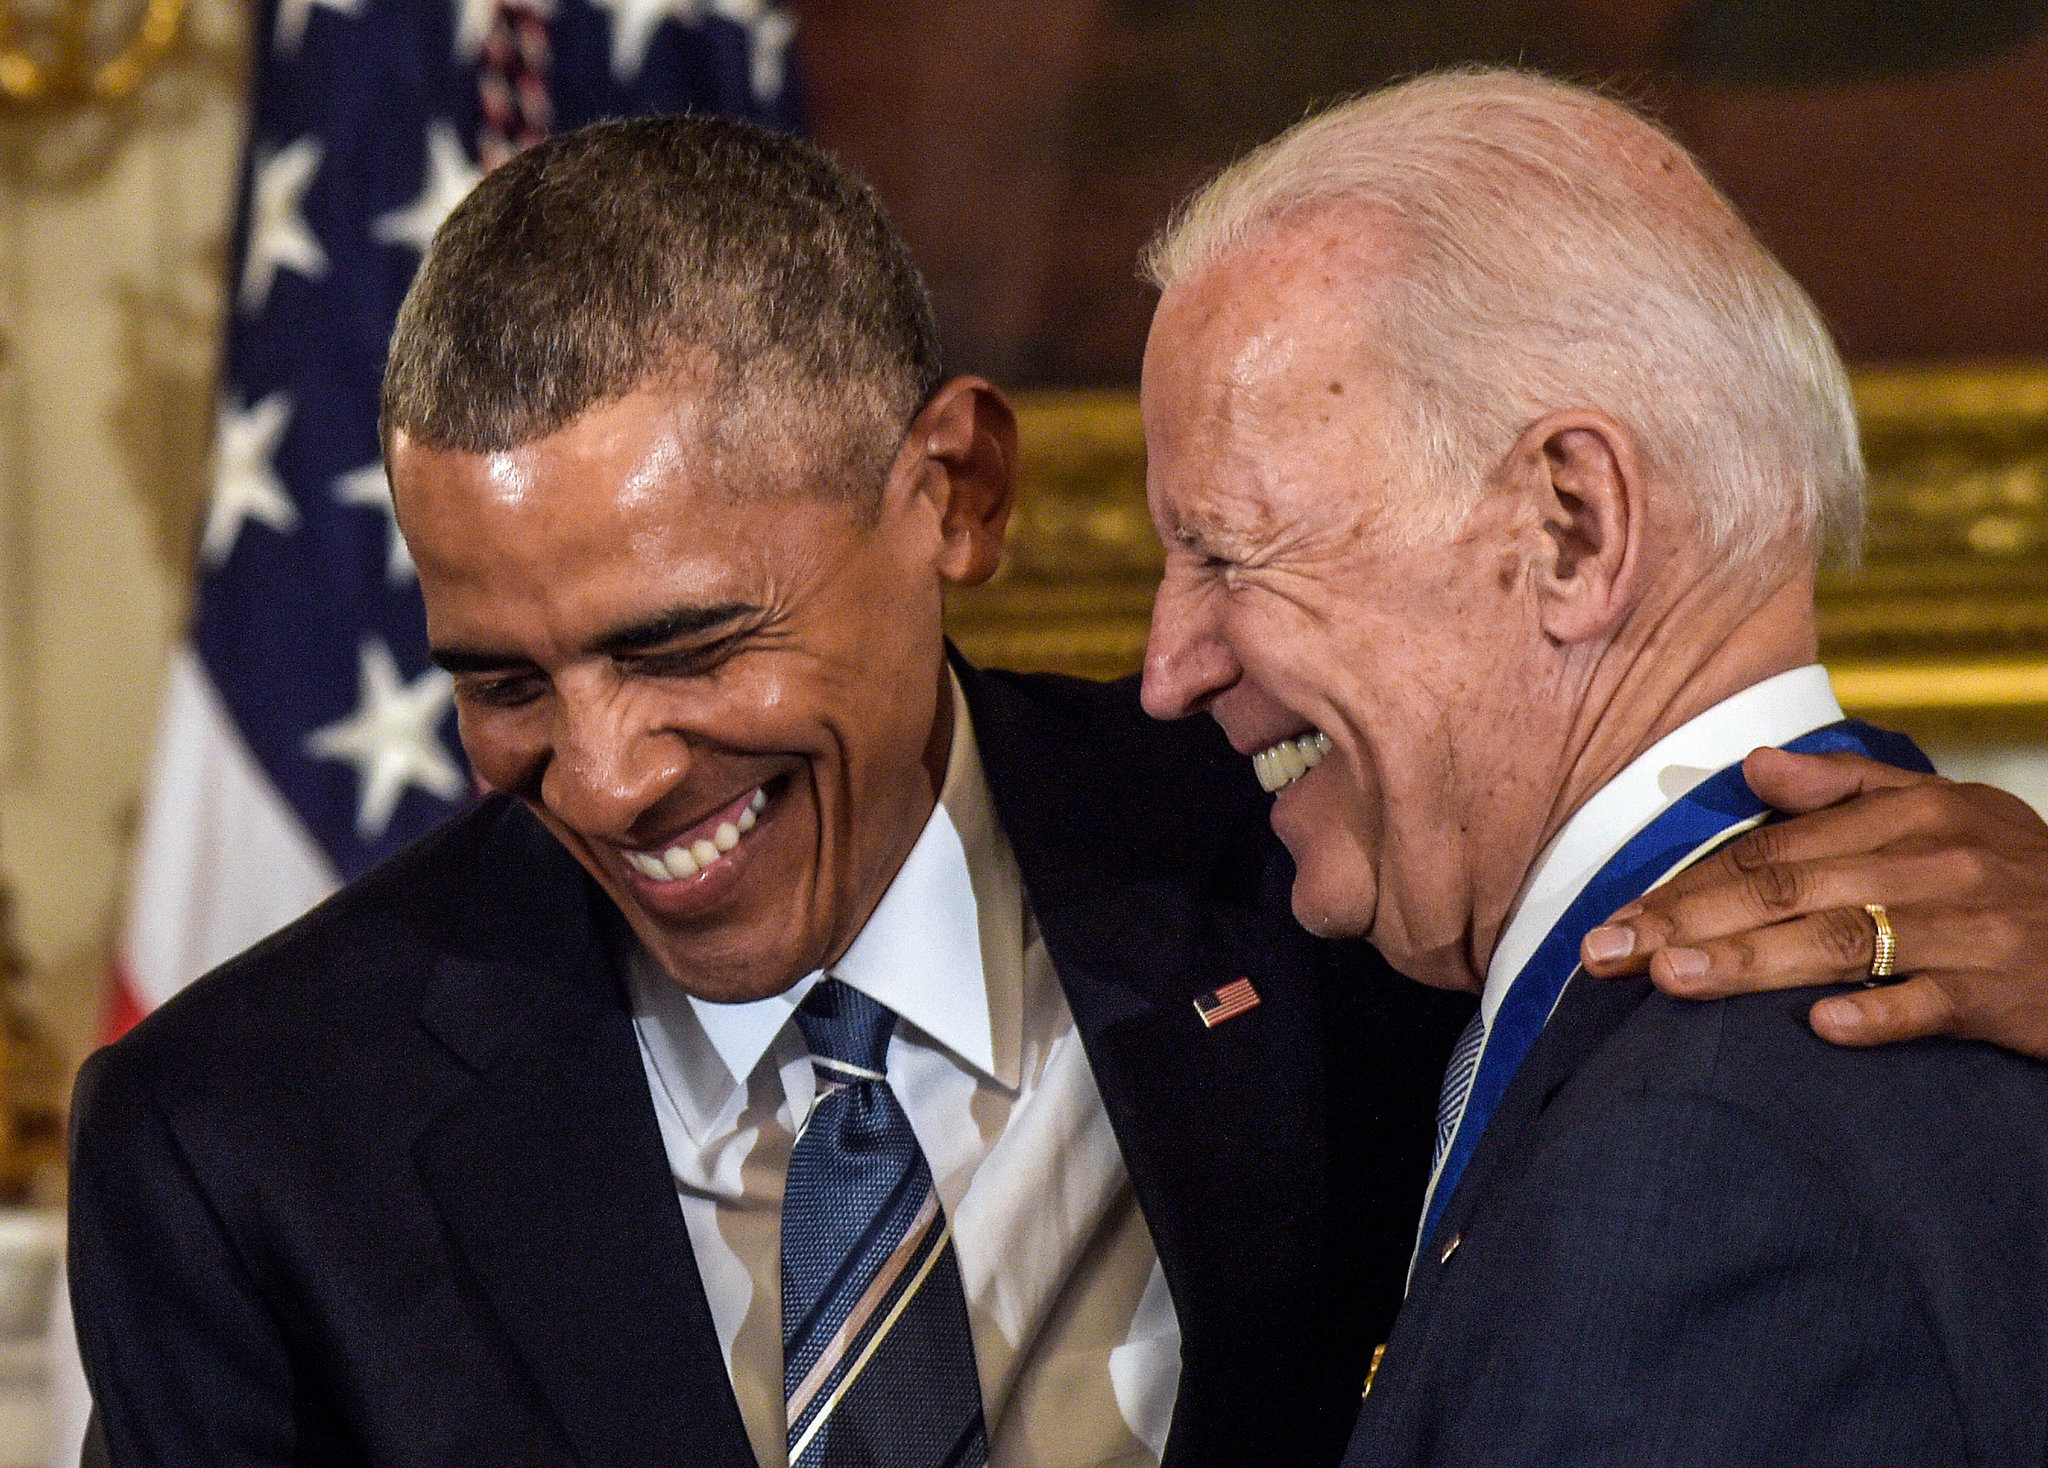 Barack Obama And Joe Biden Spent Hours Together Over Weekend; What Was The Hidden Purpose